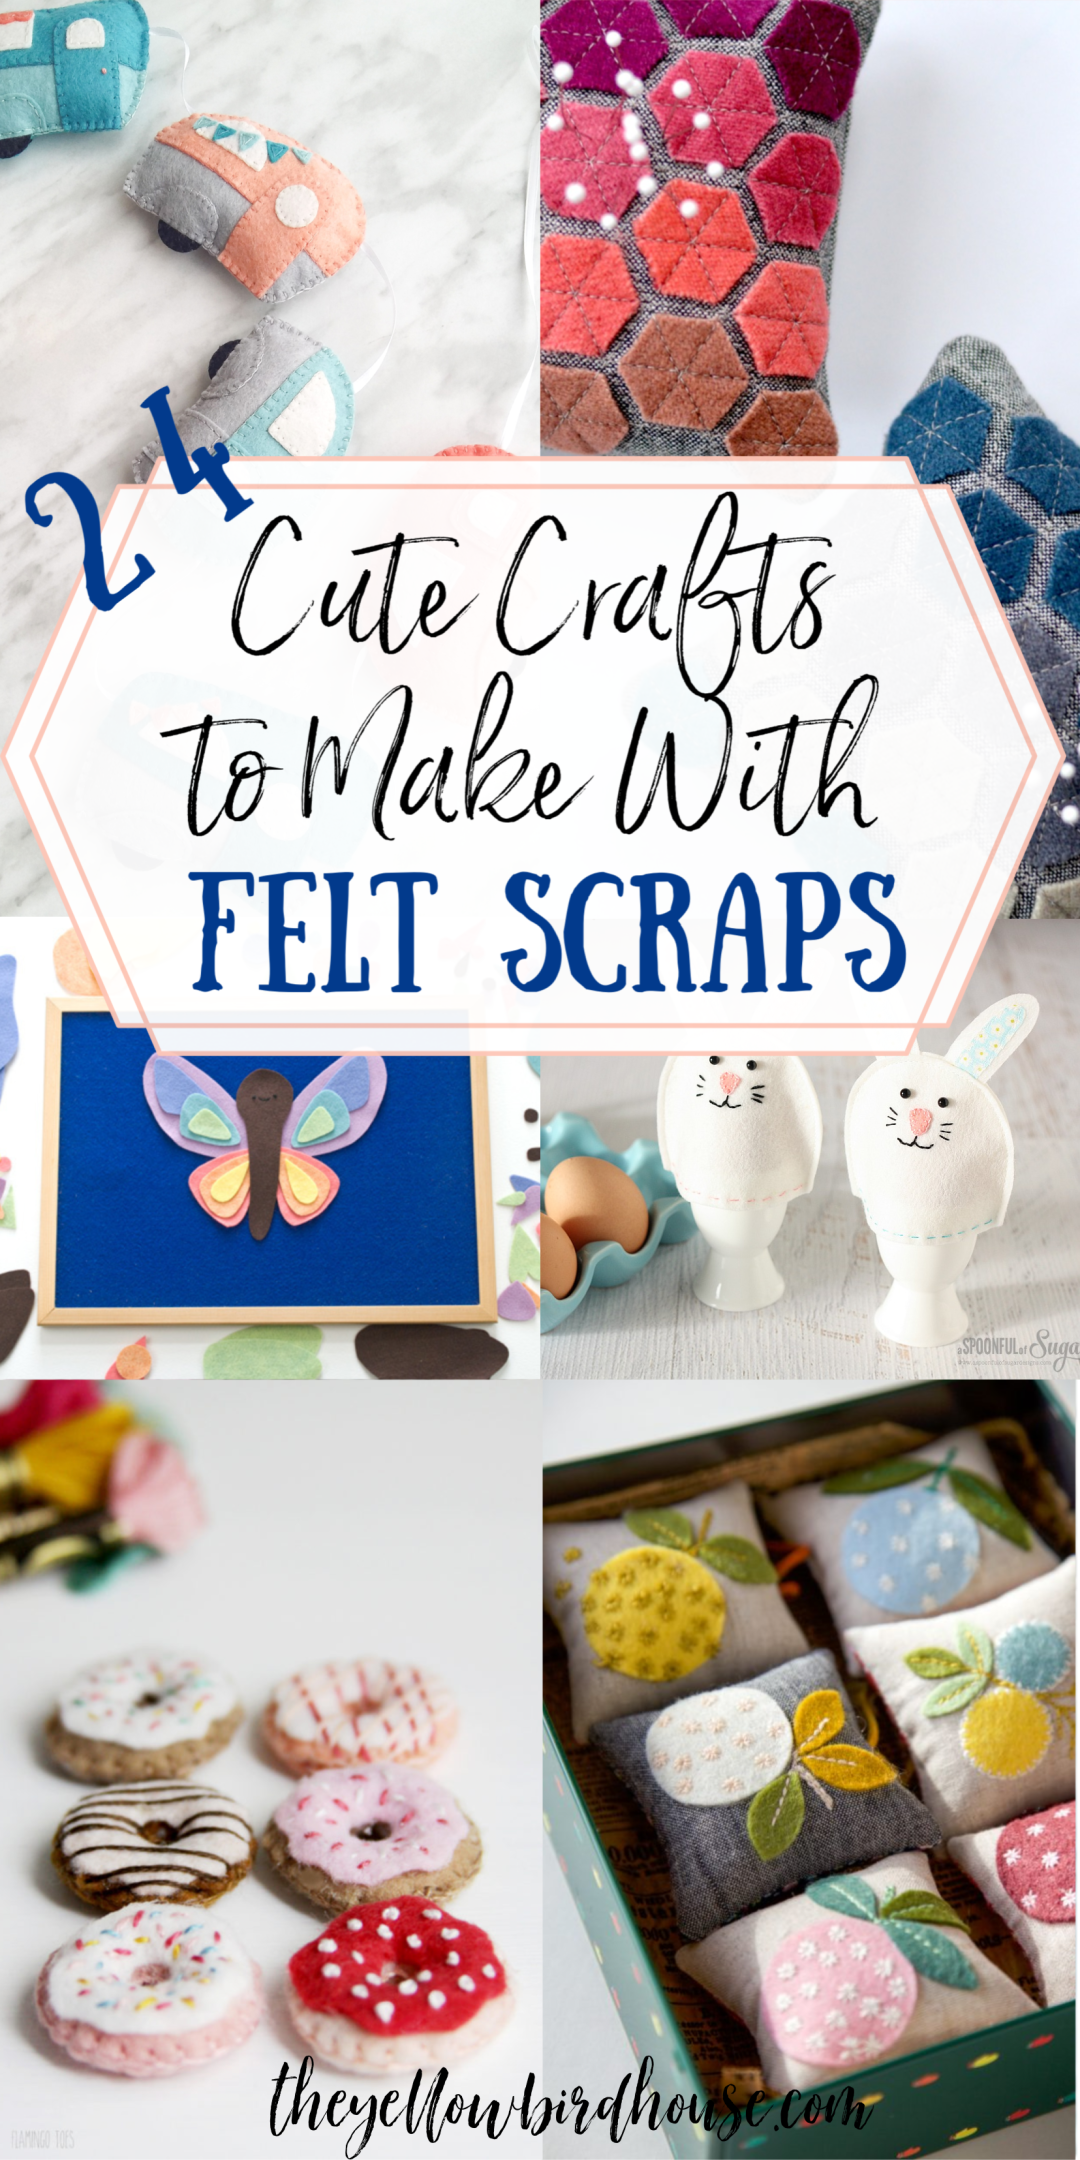 24+ Cute Crafts to Make with Felt Scraps | The Yellow Birdhouse - 24+ Cute Crafts to Make with Felt Scraps | The Yellow Birdhouse -   19 fabric crafts diy easy ideas